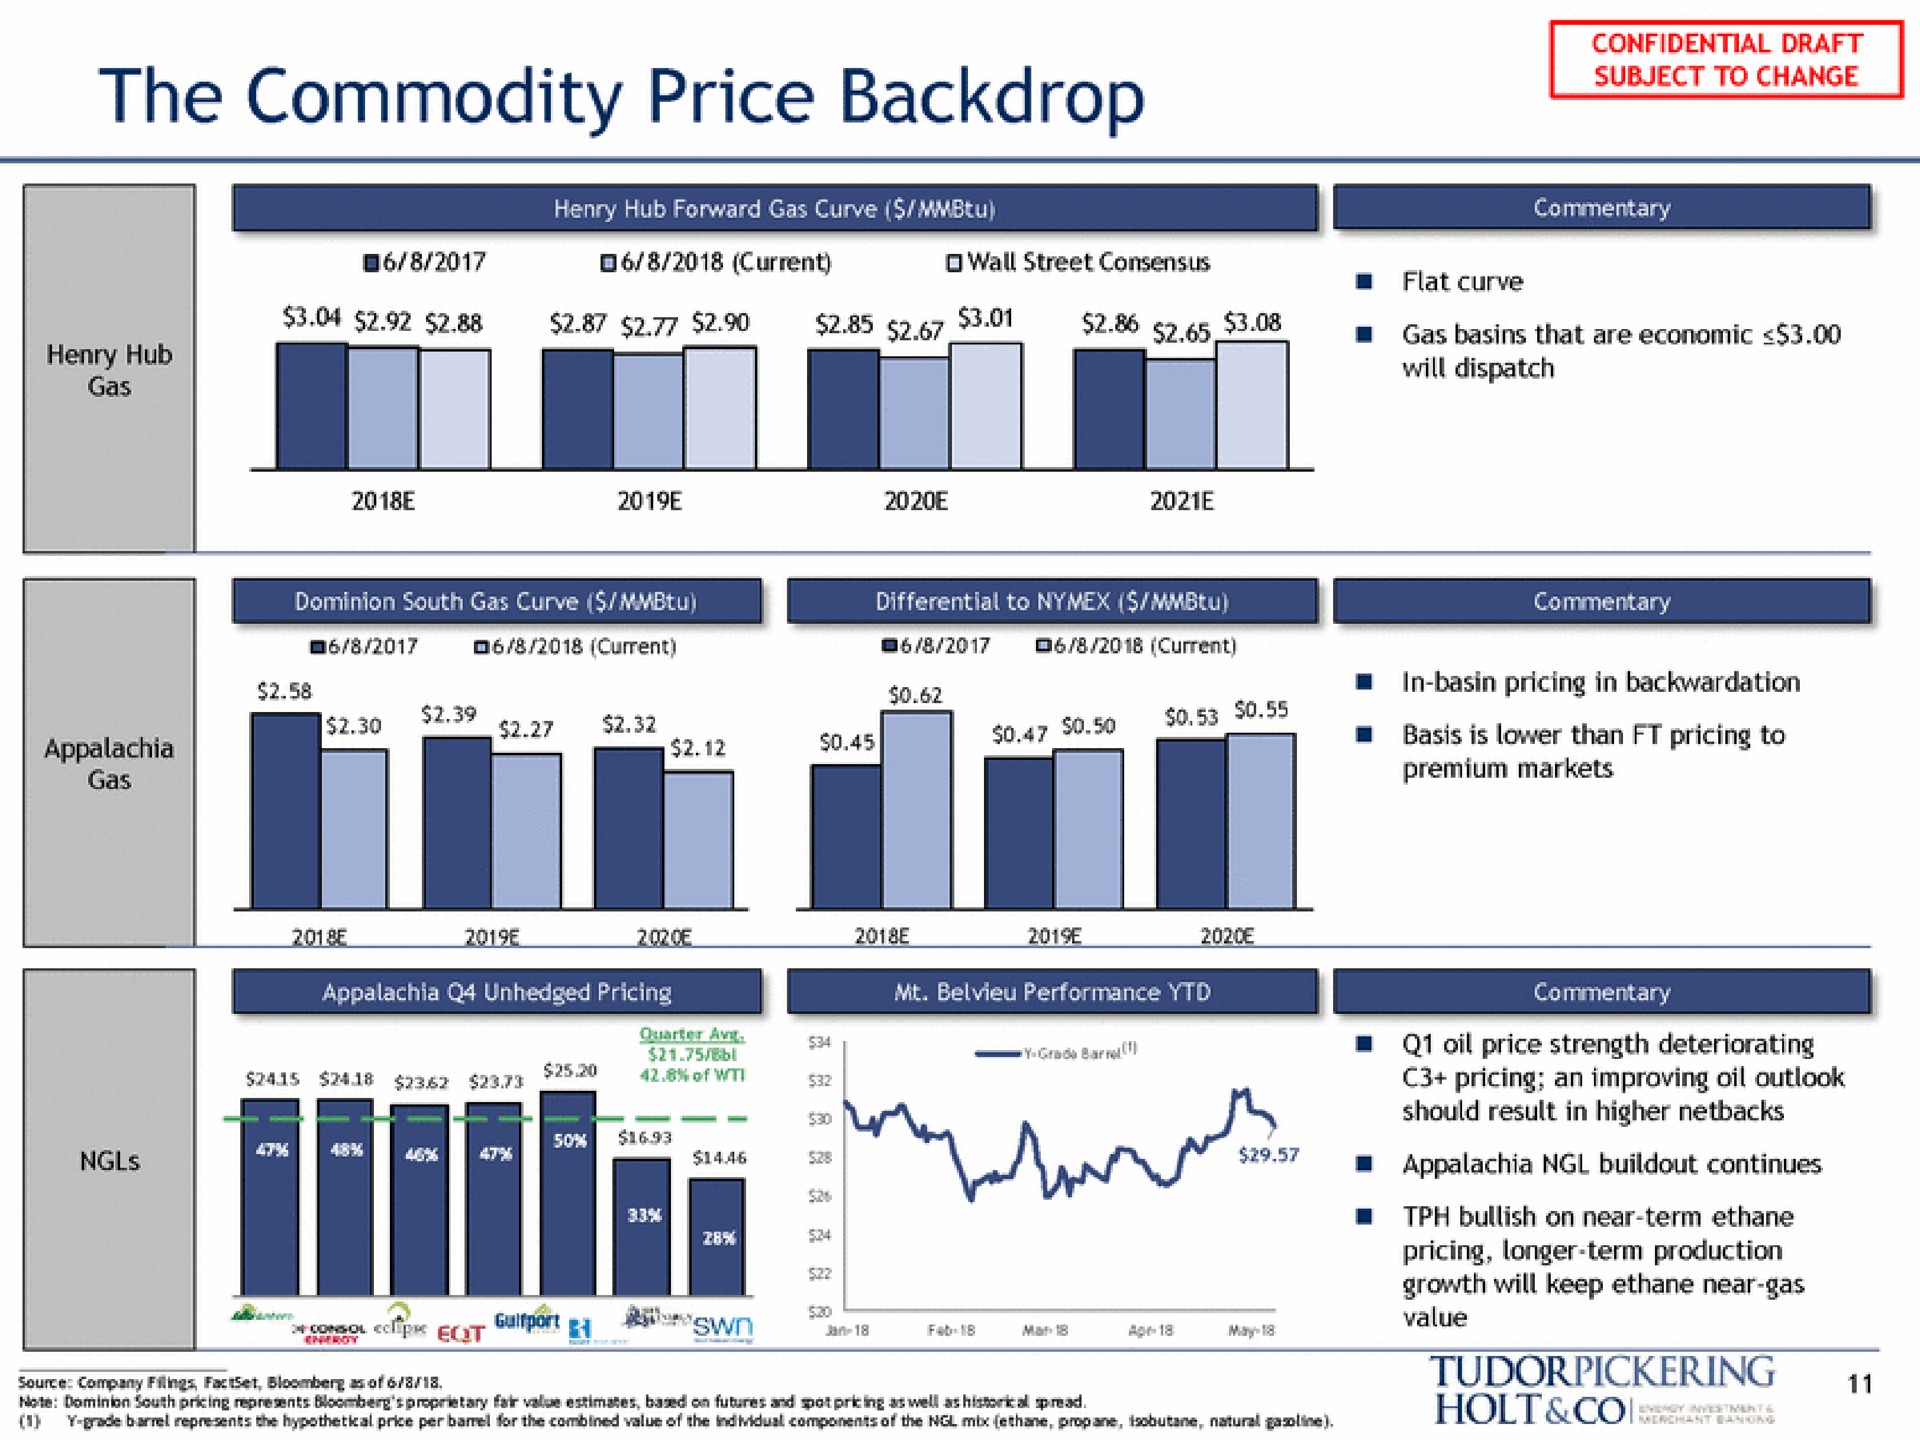 the commodity price backdrop henry hub will dispatch | Tudor, Pickering, Holt & Co